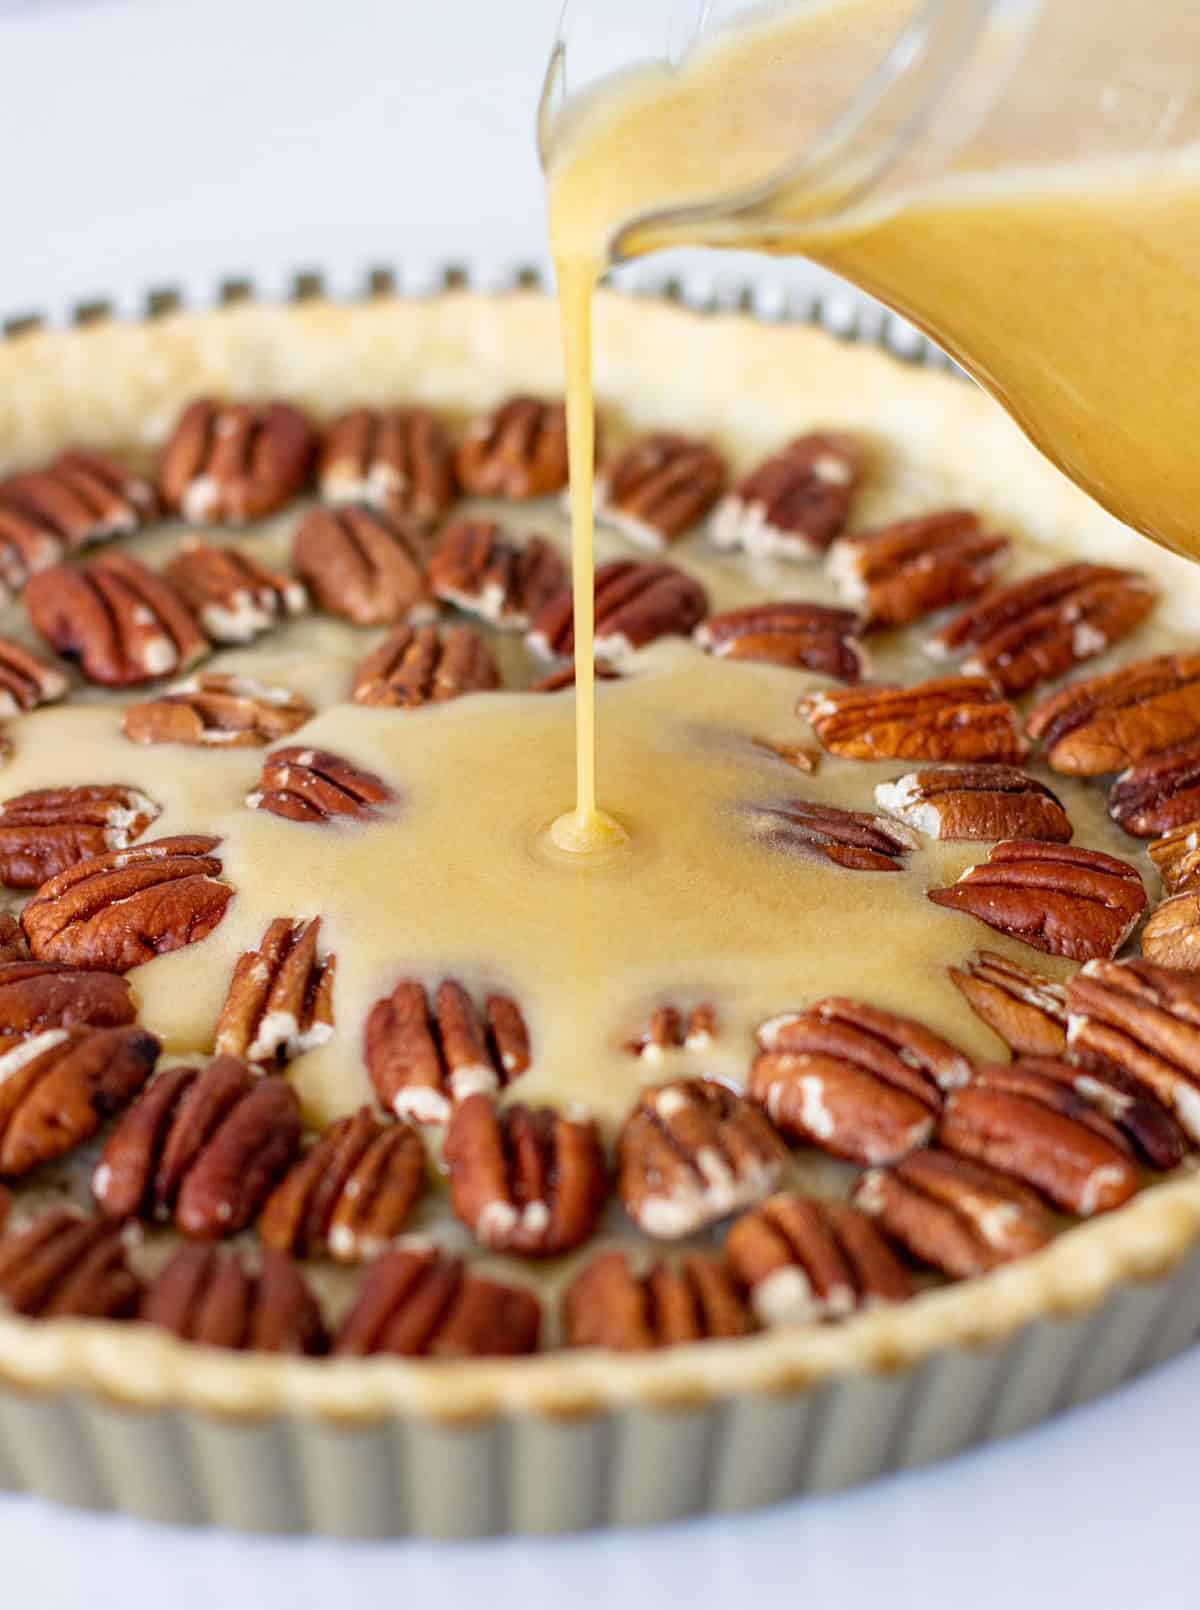 Bourbon butter filling being poured in a pie crust filled with pecans